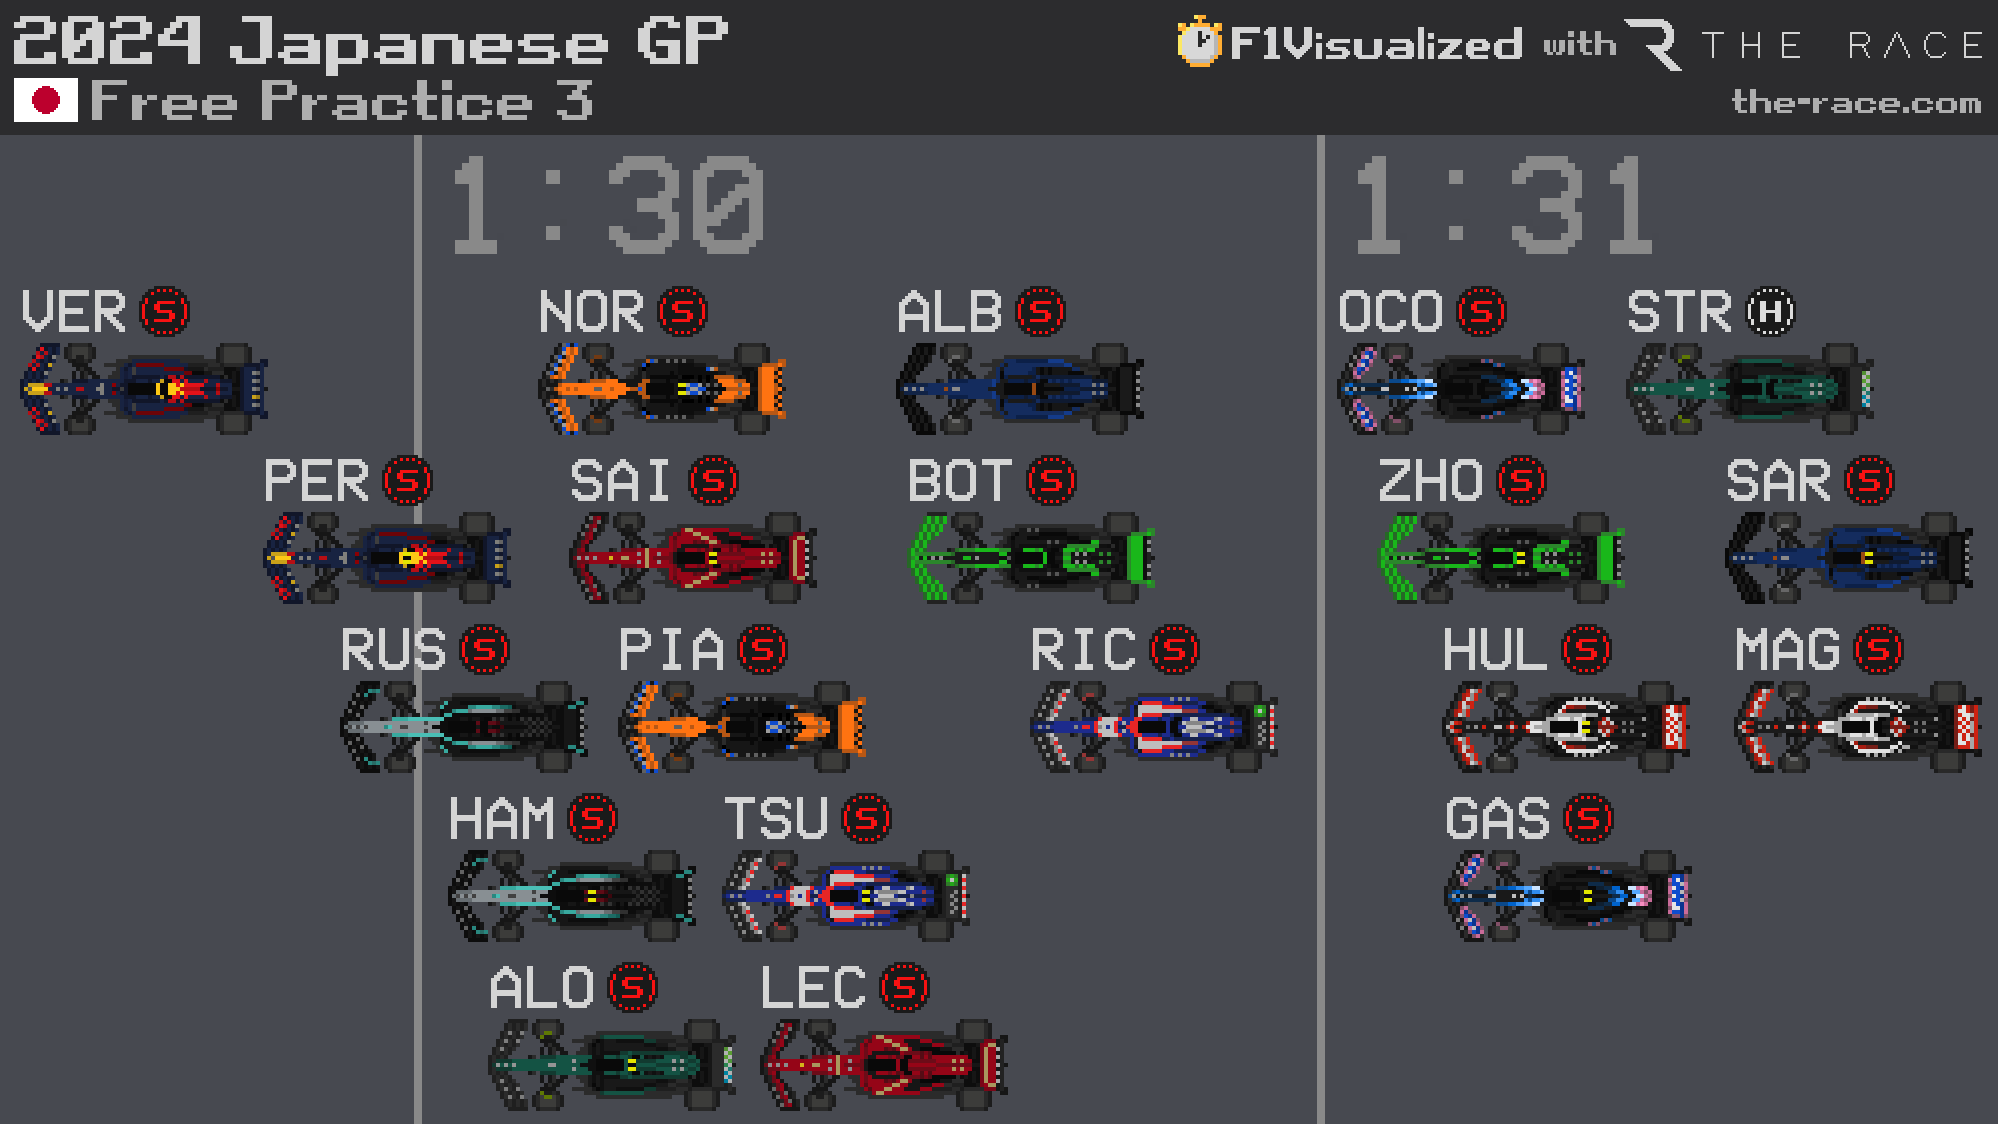 Japanese Grand Prix FP3 times, with Max Verstappen fastest from Sergio Perez